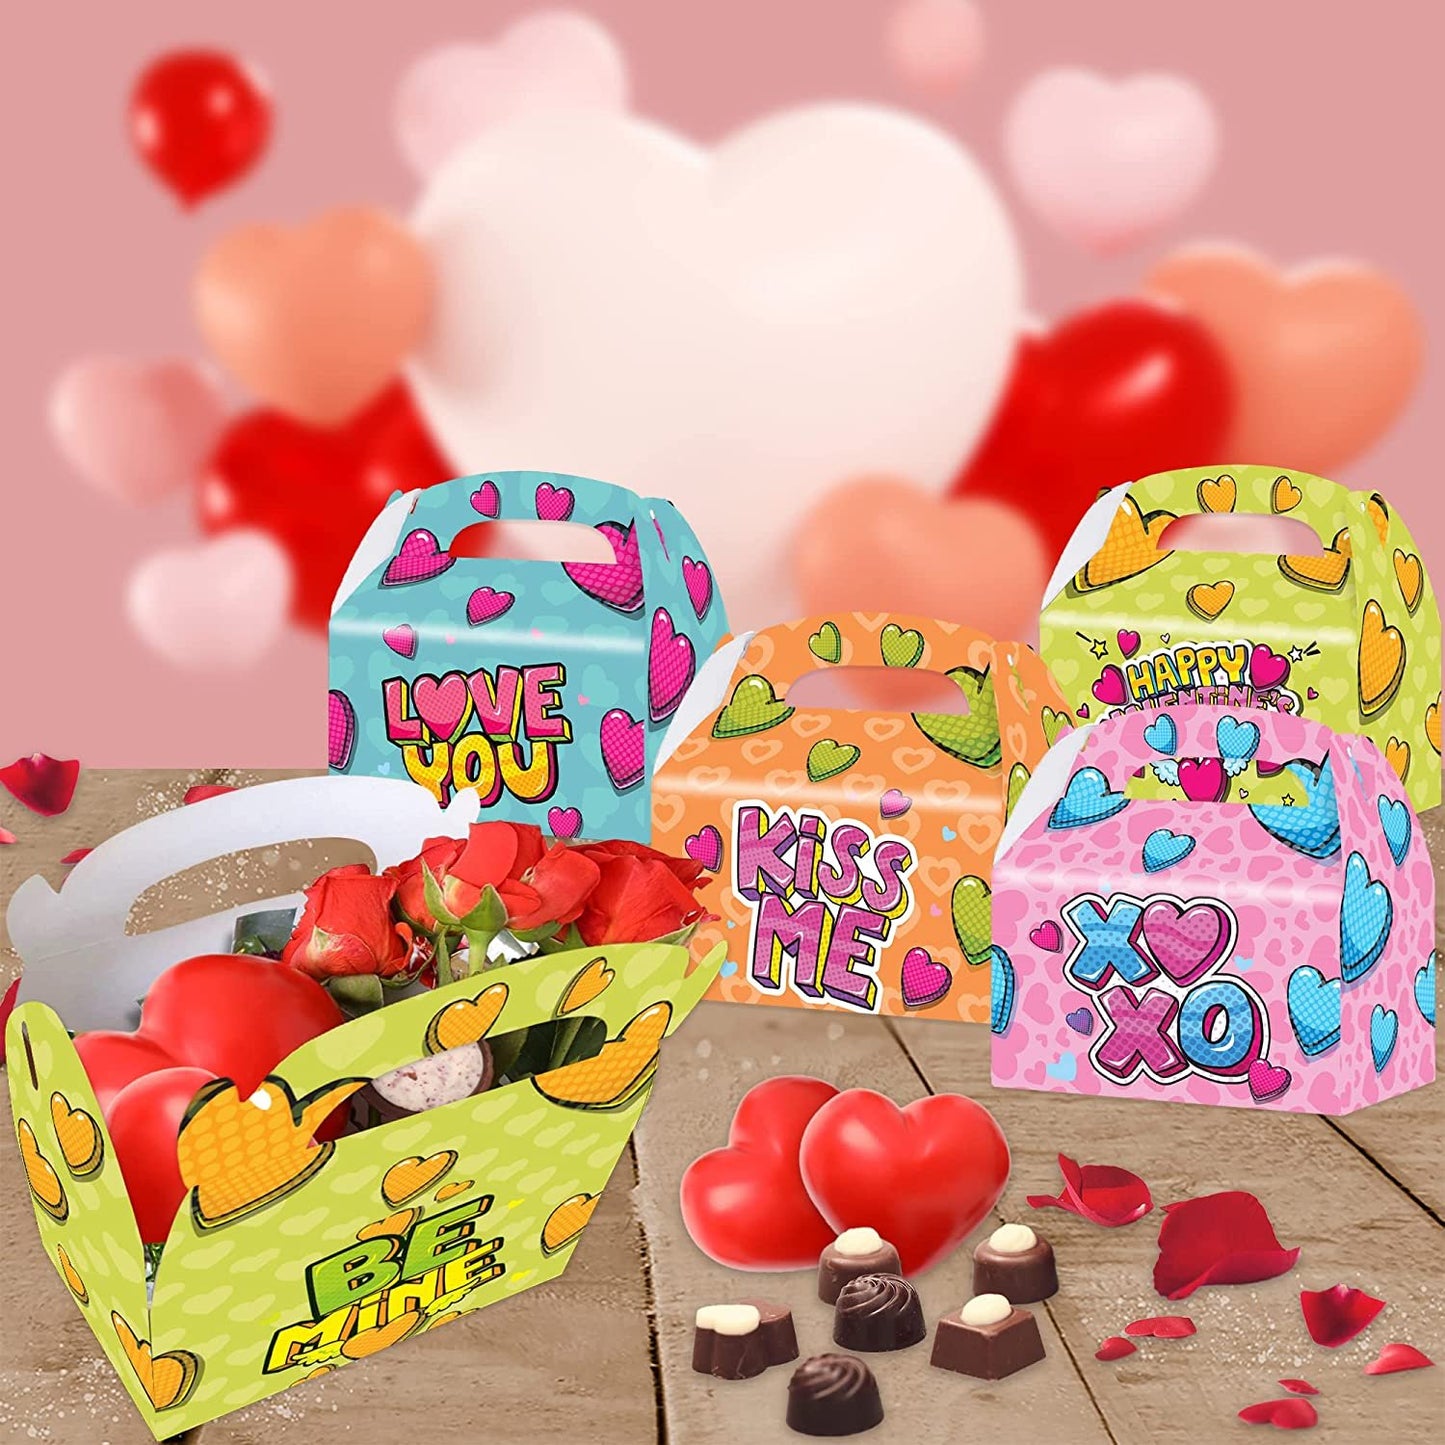 ArtCreativity Valentines Day Treat Boxes, Set of 12, Cardboard Paper Valentines Candy Boxes with Carry Handles, Themed Party Favor Boxes, Valentines Goodie Bags for Sweets, Toys, Gifts, and More